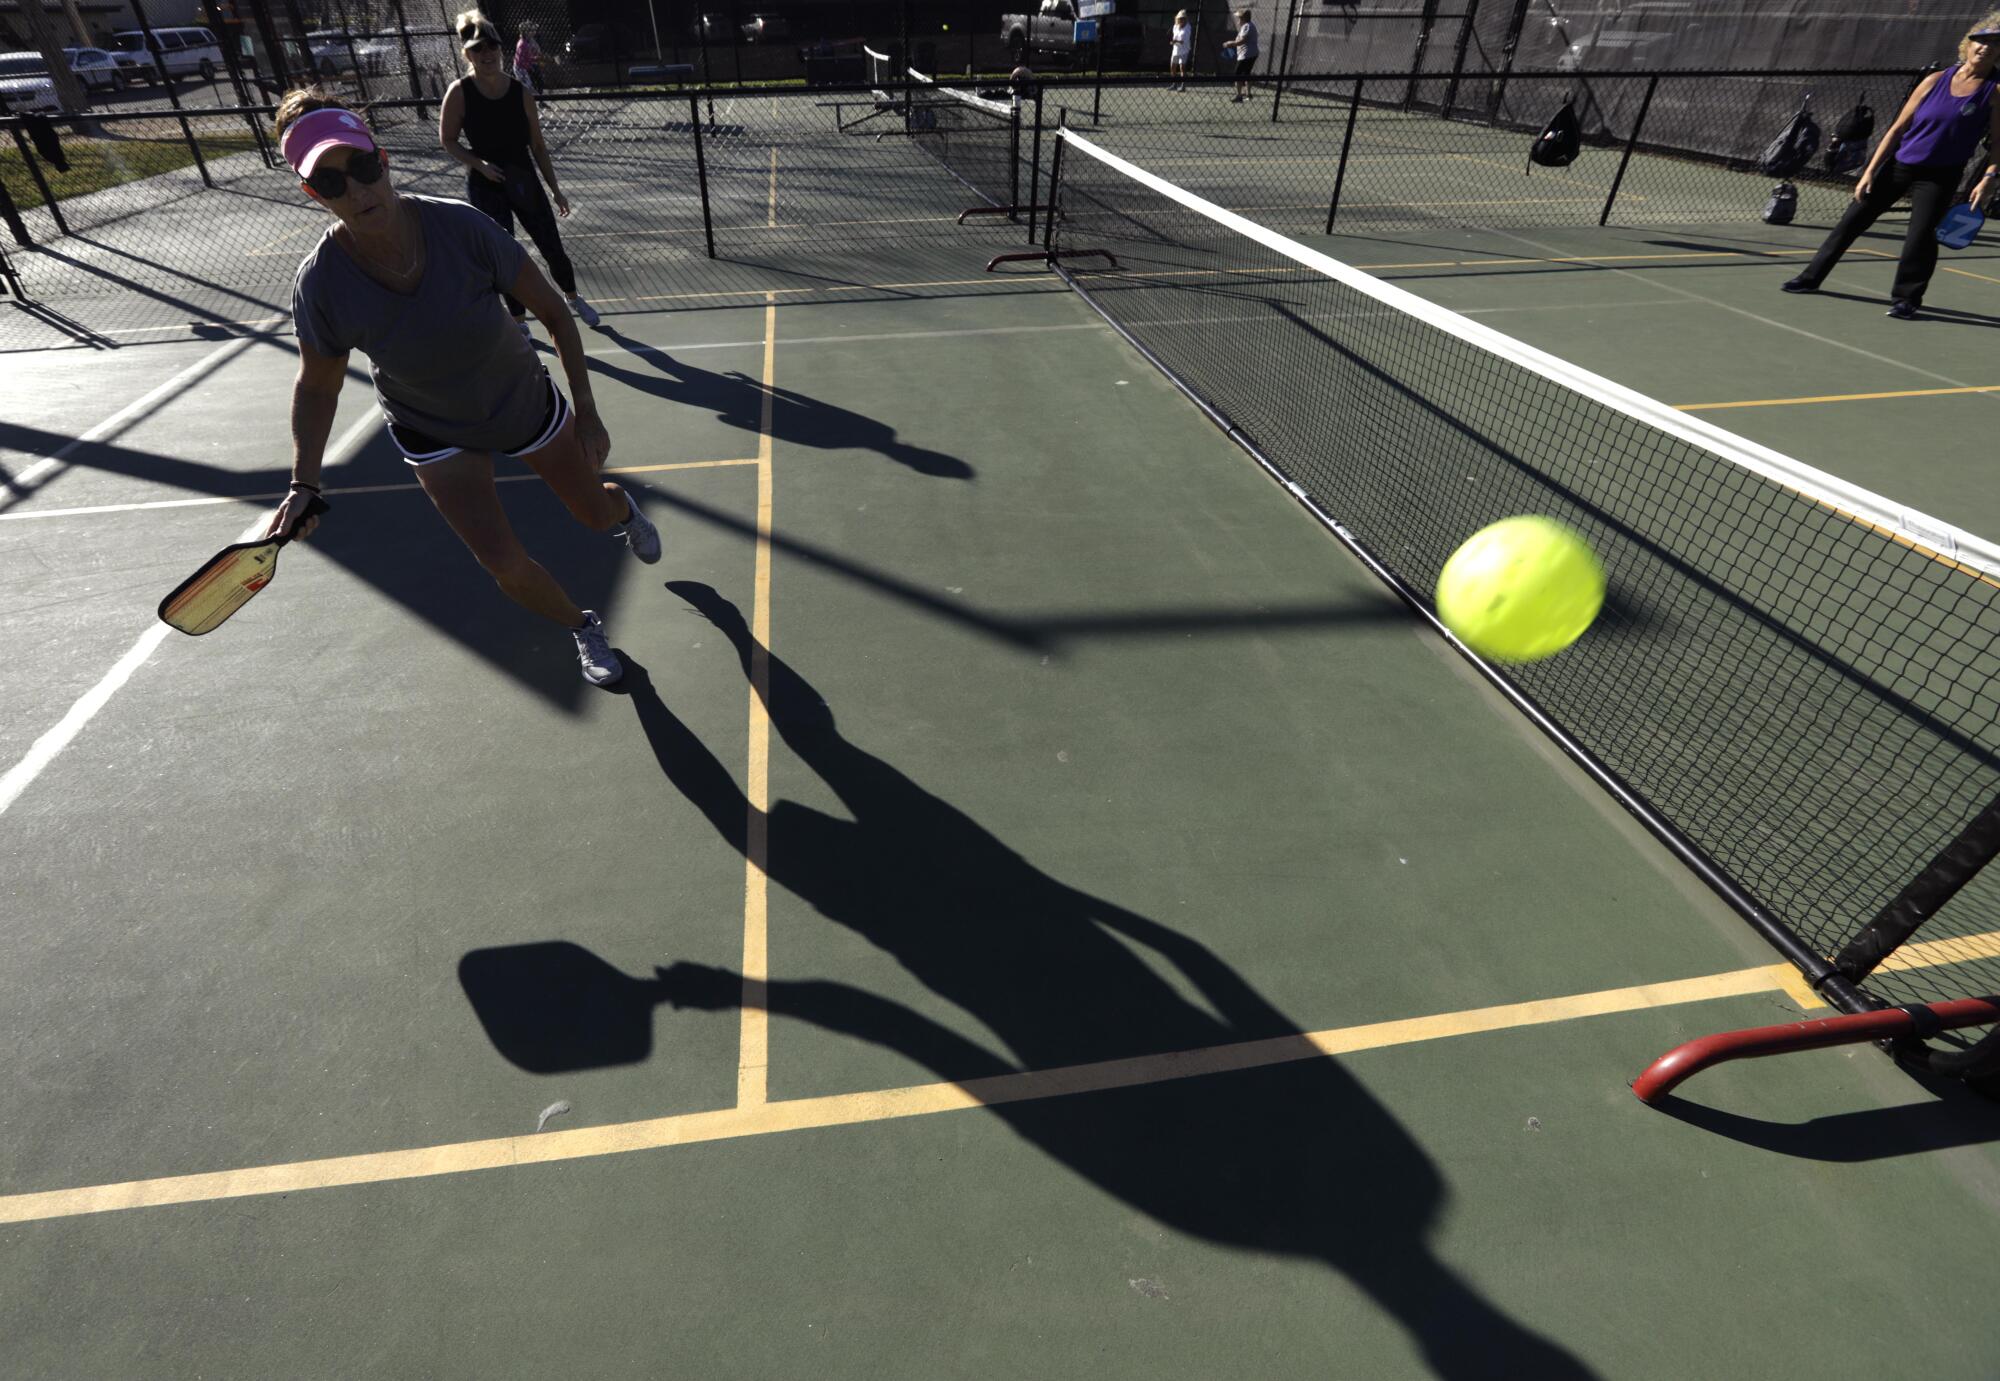 Lisa Streett goes after a ball while playing a game of pickleball at the Goleta Valley Community Center.